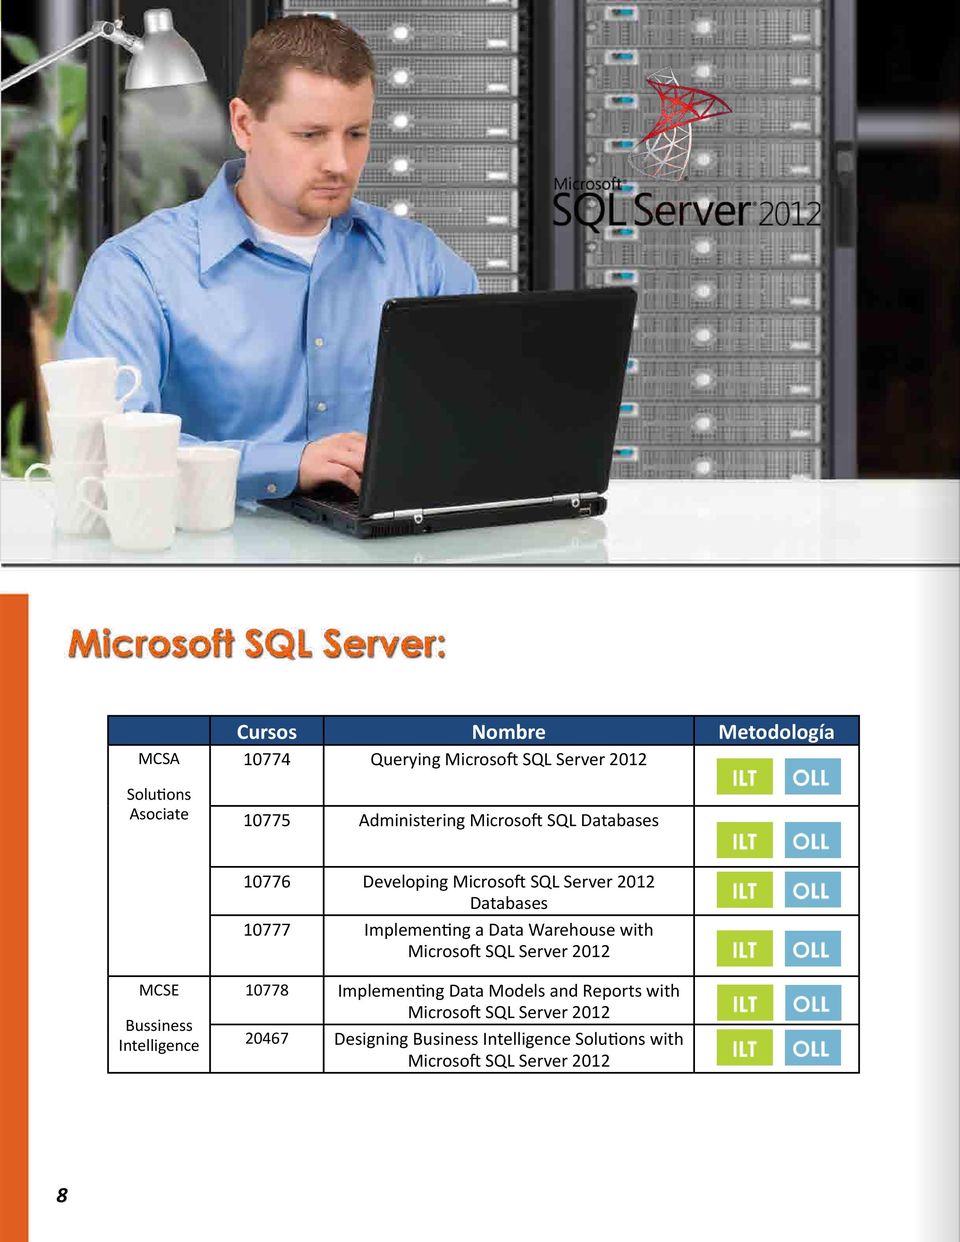 a Data Warehouse with Microsoft SQL Server 2012 MCSE Bussiness Intelligence 10778 Implementing Data Models